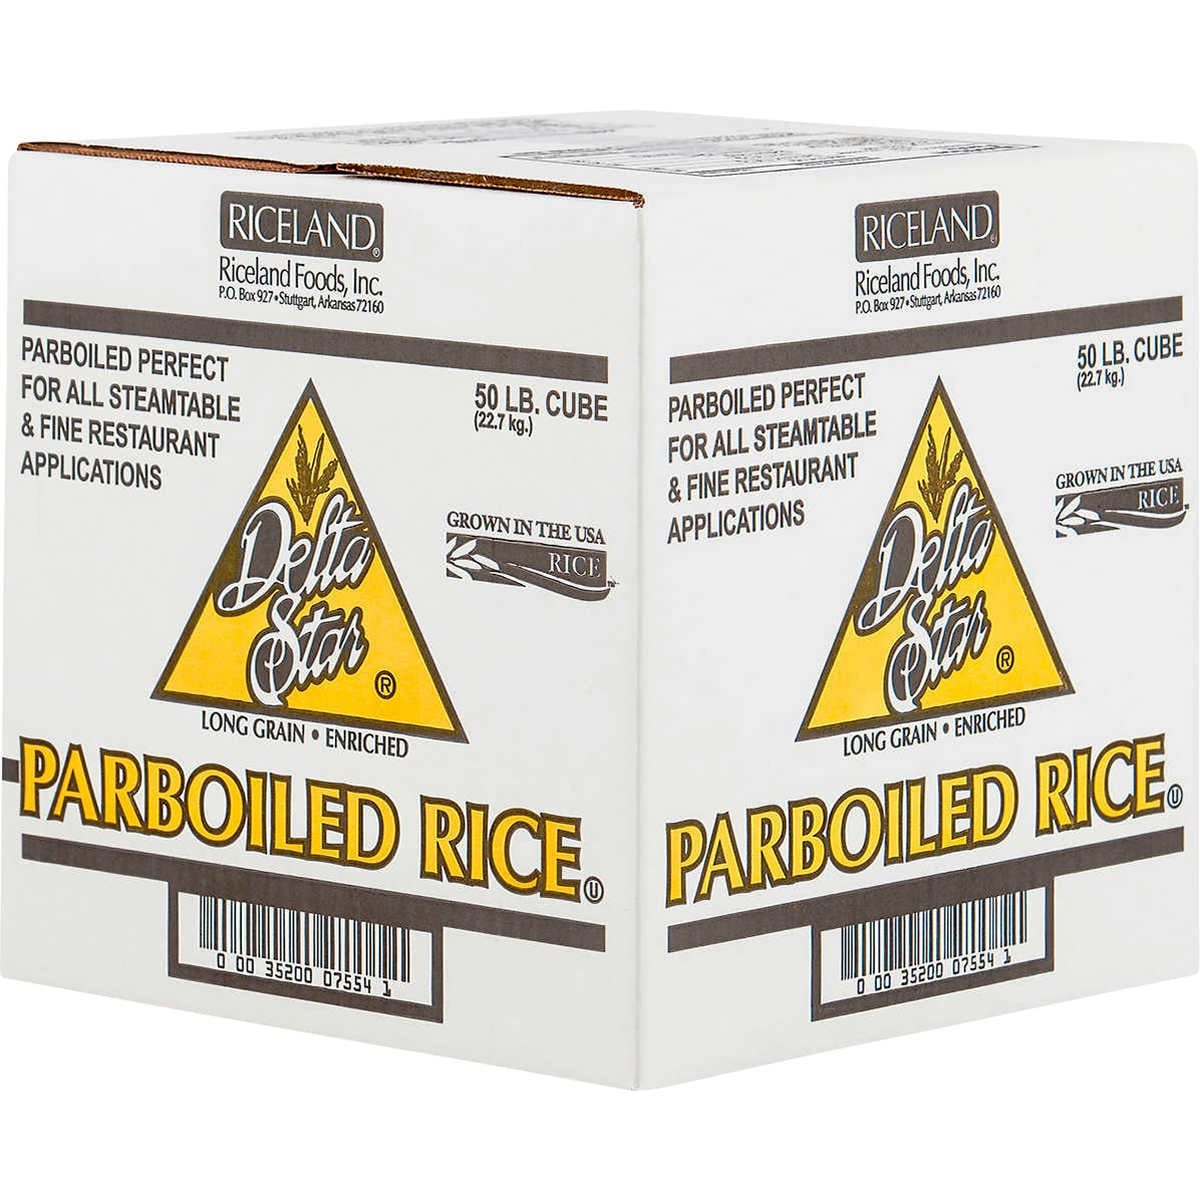 slide 1 of 1, Riceland Foods, Inc.. Delta Star Parboiled Rice Cube, 50 lb